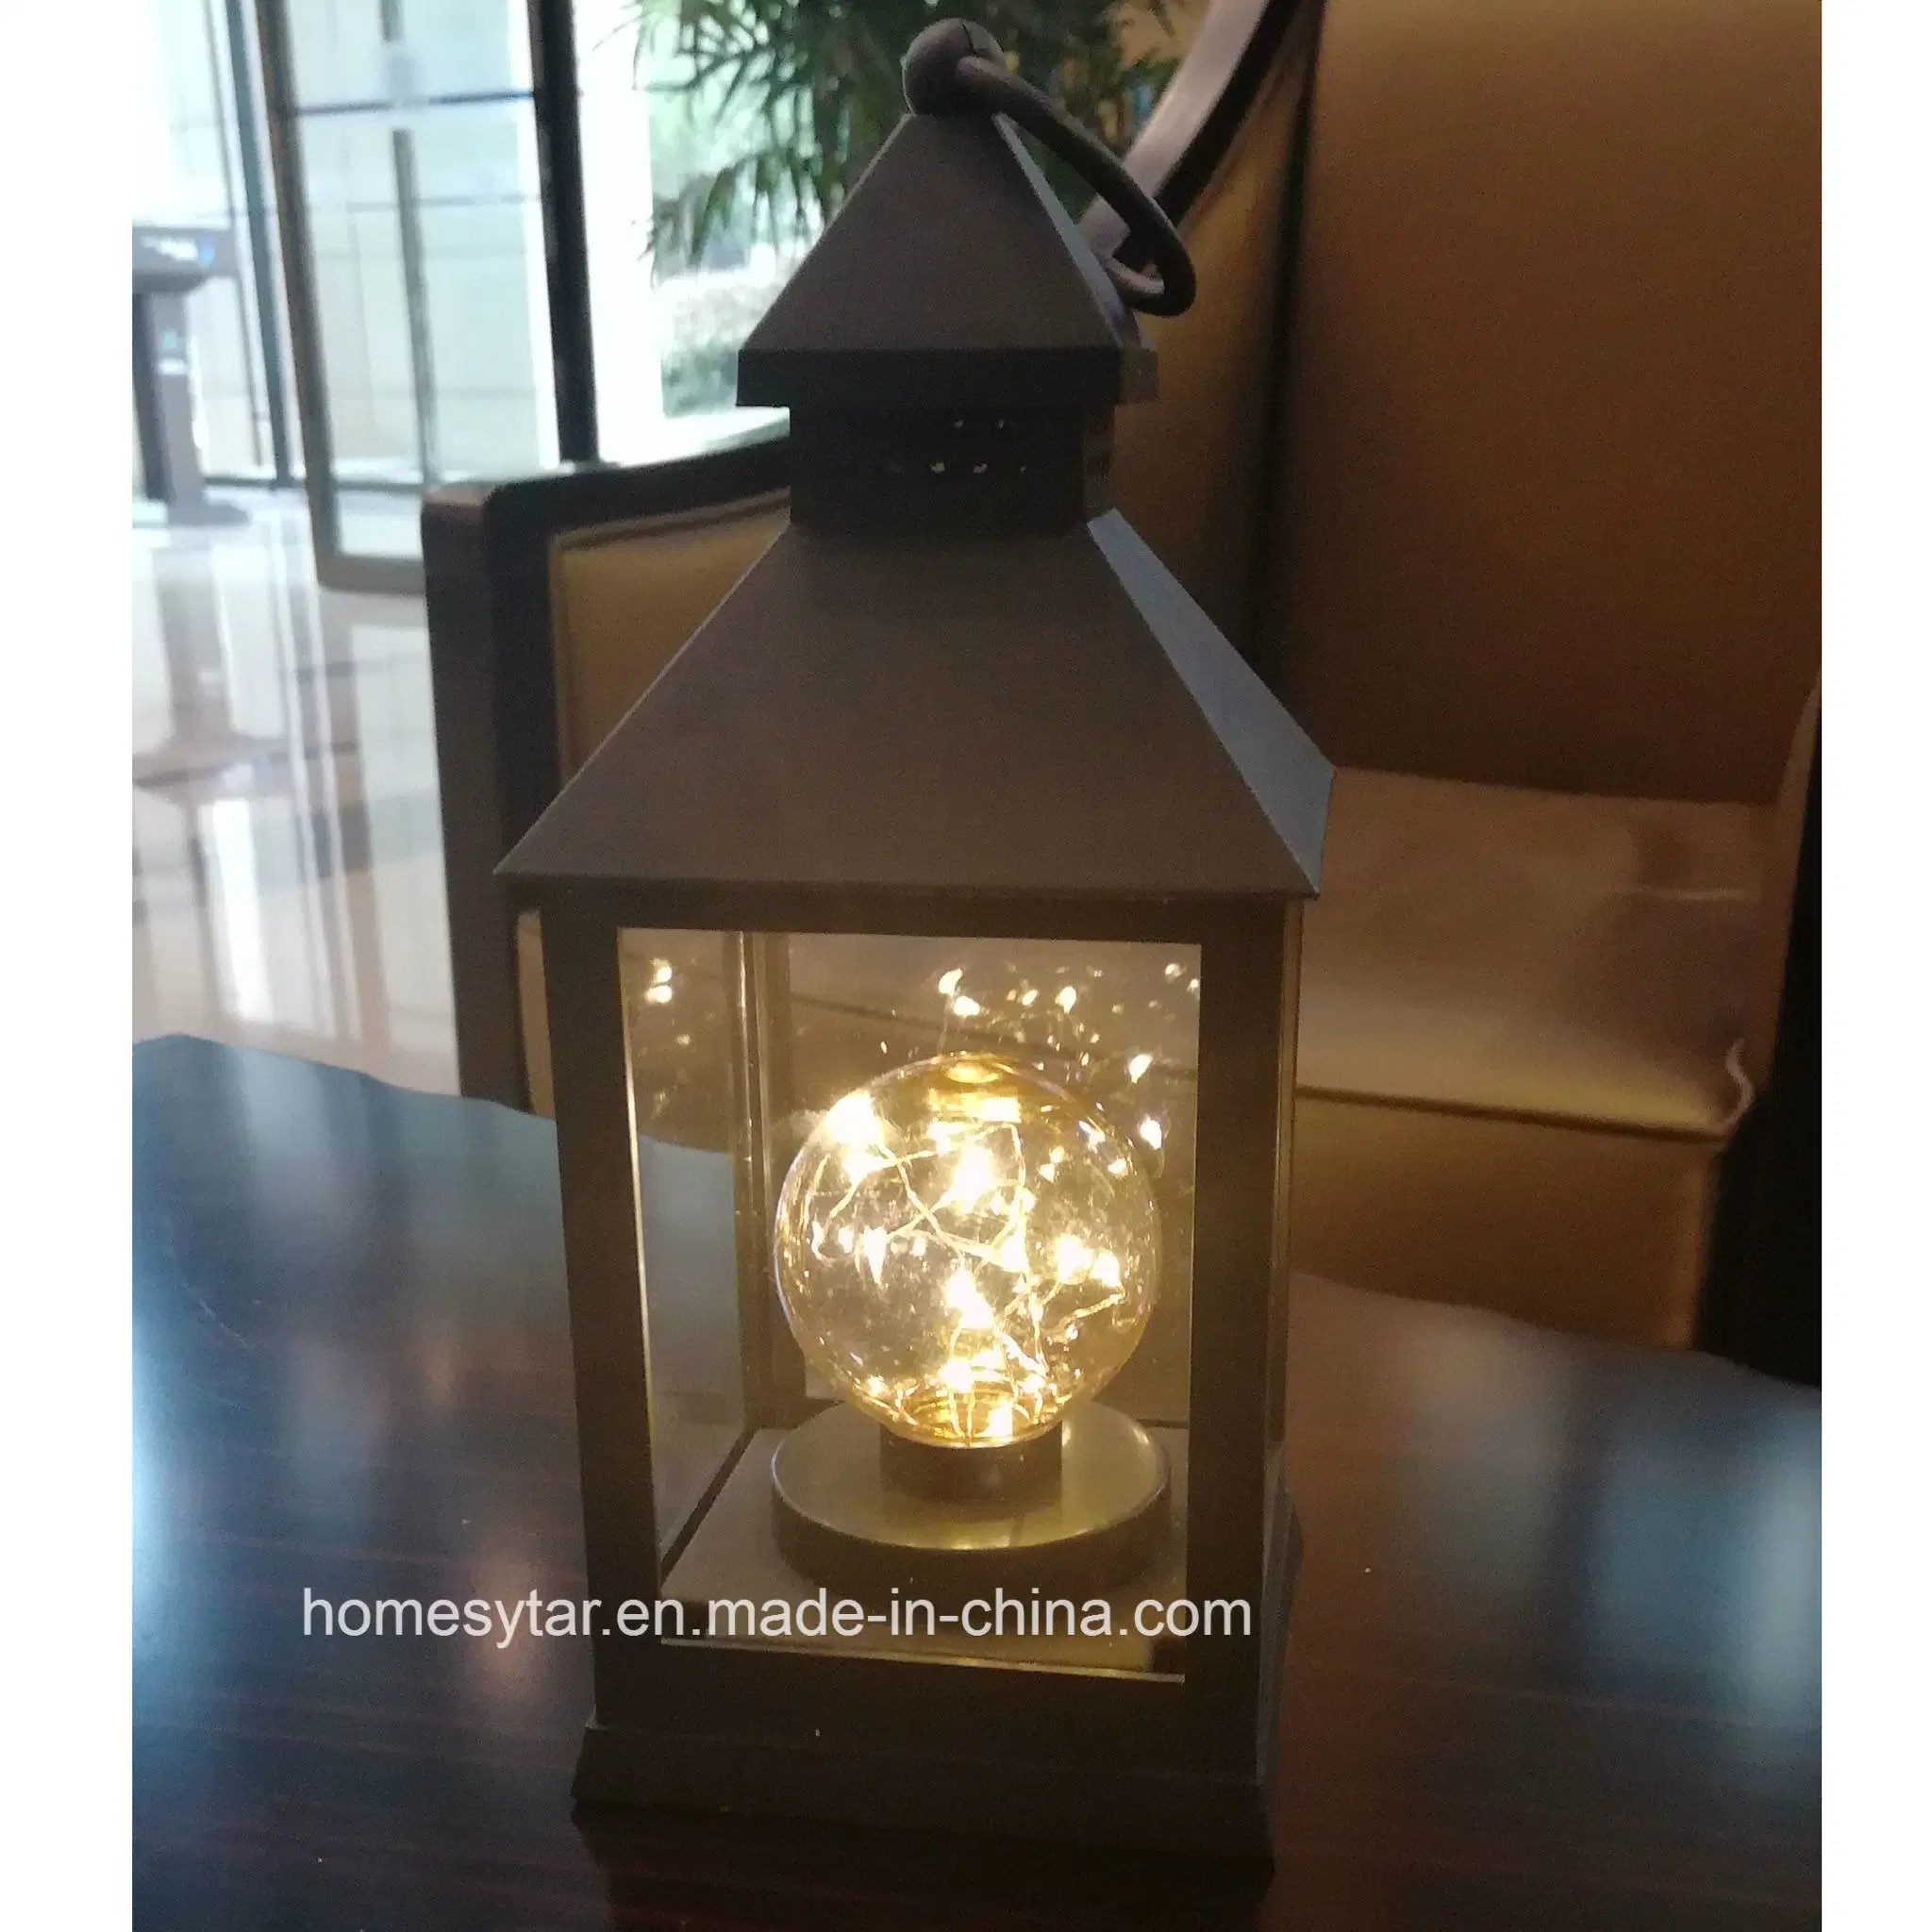 LED Lantern with Round Candle Lamp for Home Decoration and Garden Ornaments